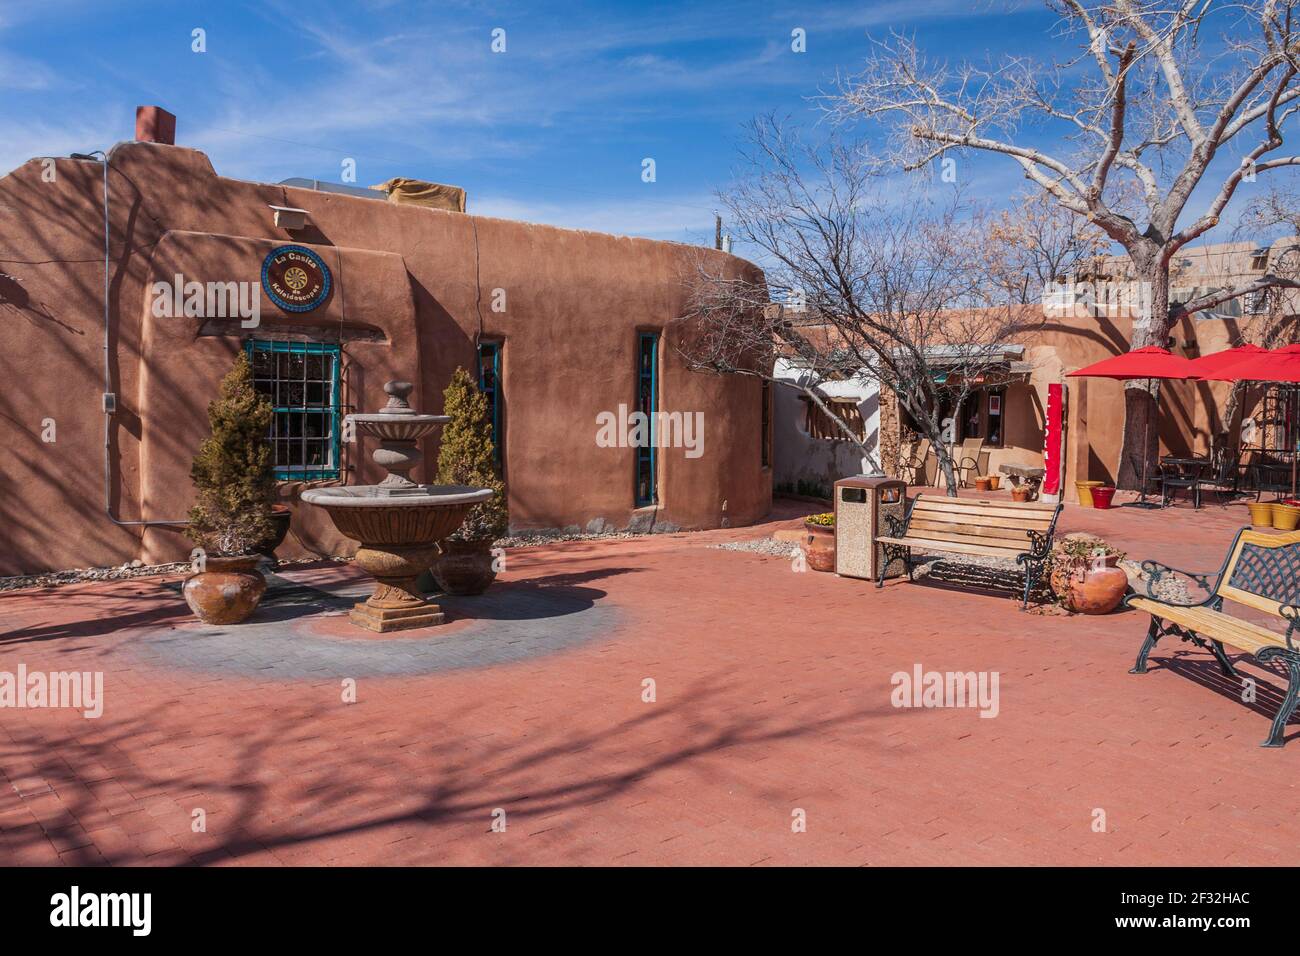 Old Town Albuquerque, the serene village that has been the focal point of Albuquerque community life since 1706. Stock Photo